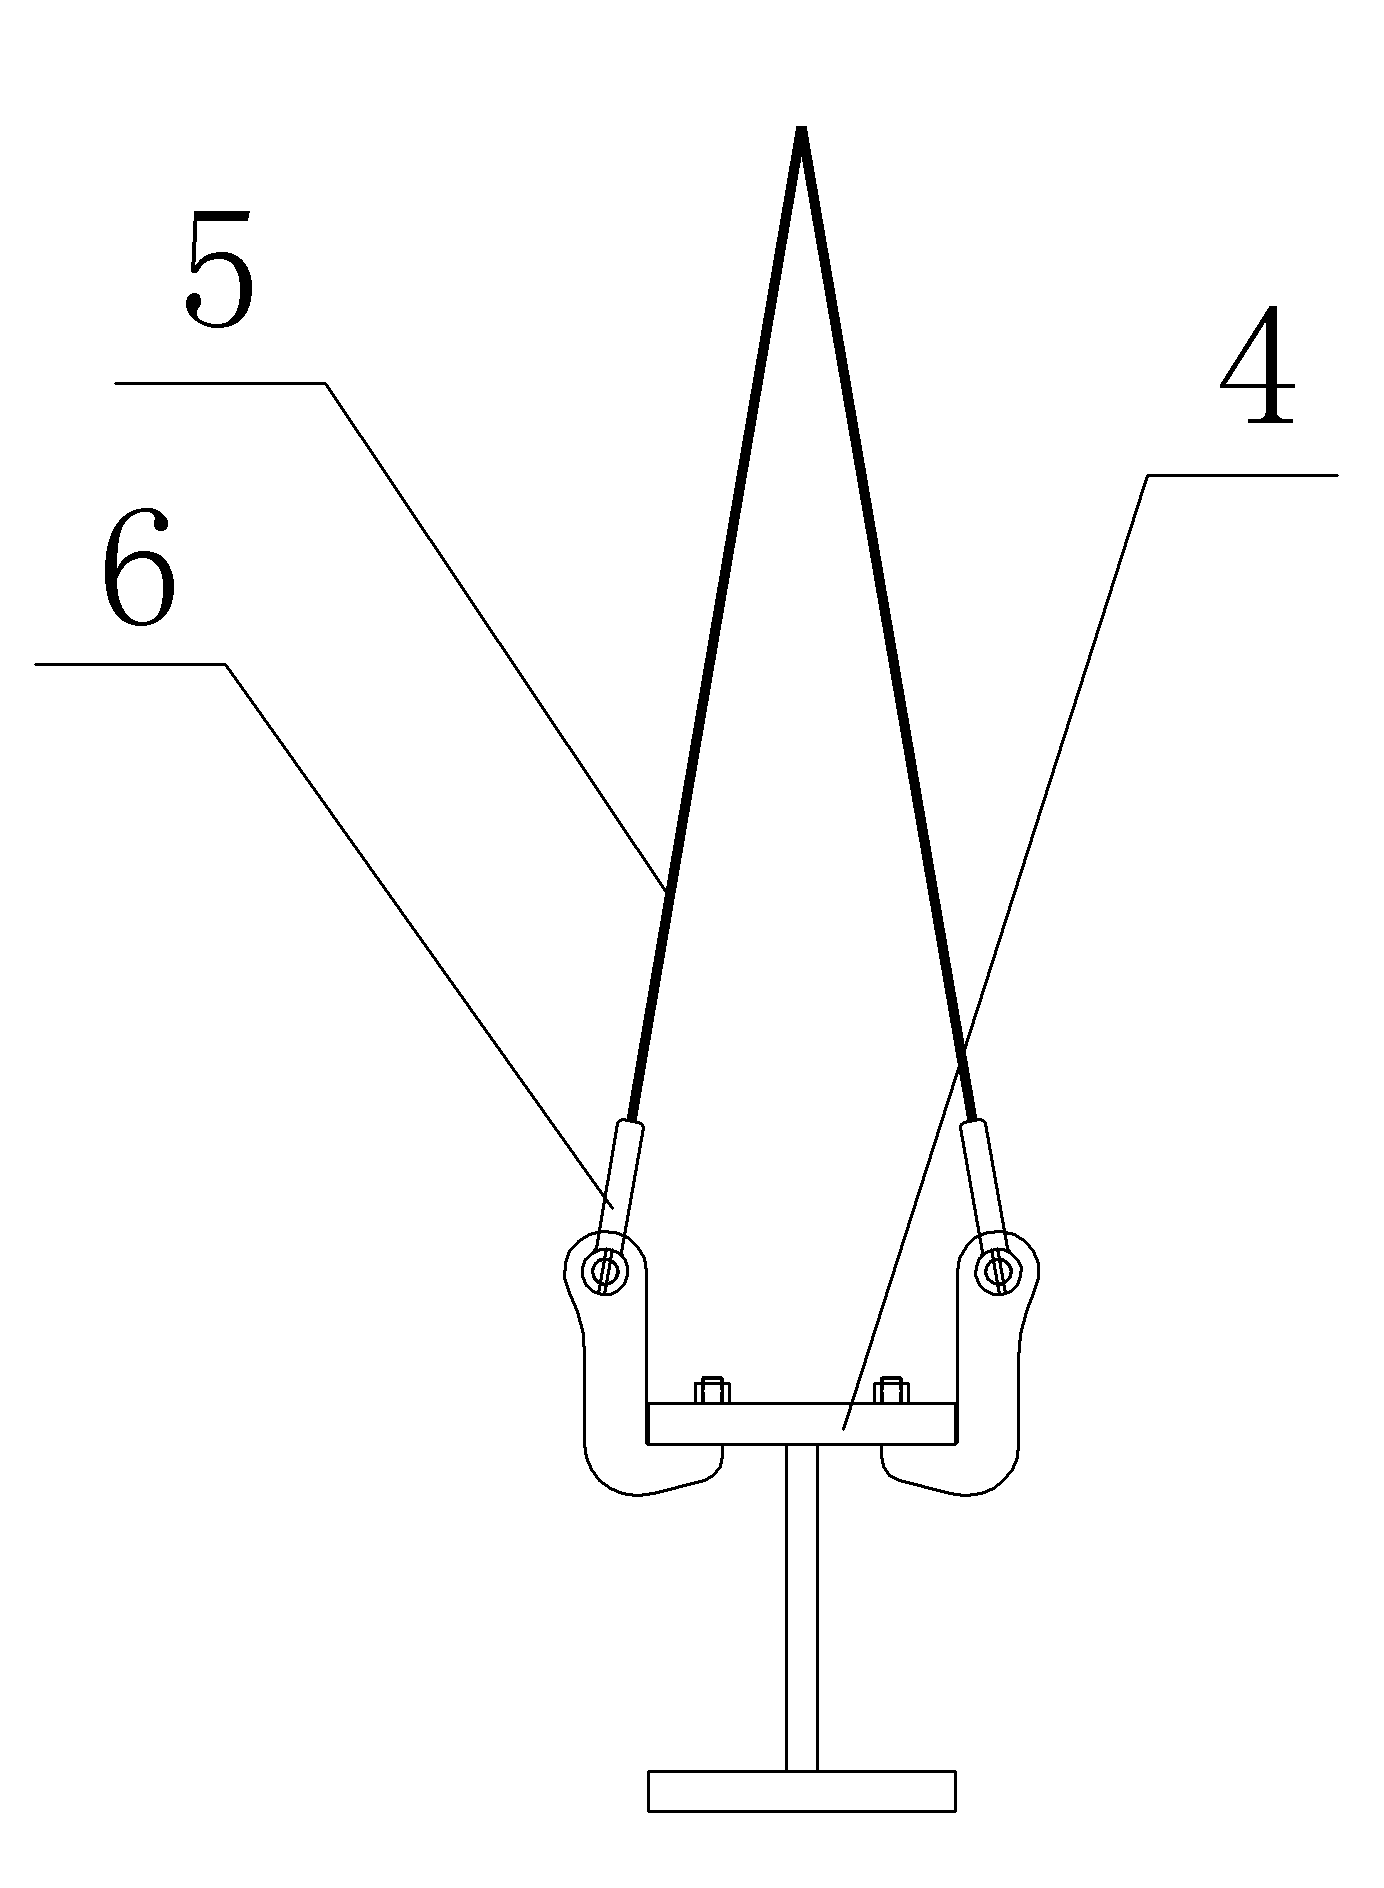 Special lifting appliance for H-shaped steel beam and lifting method using lifting appliance